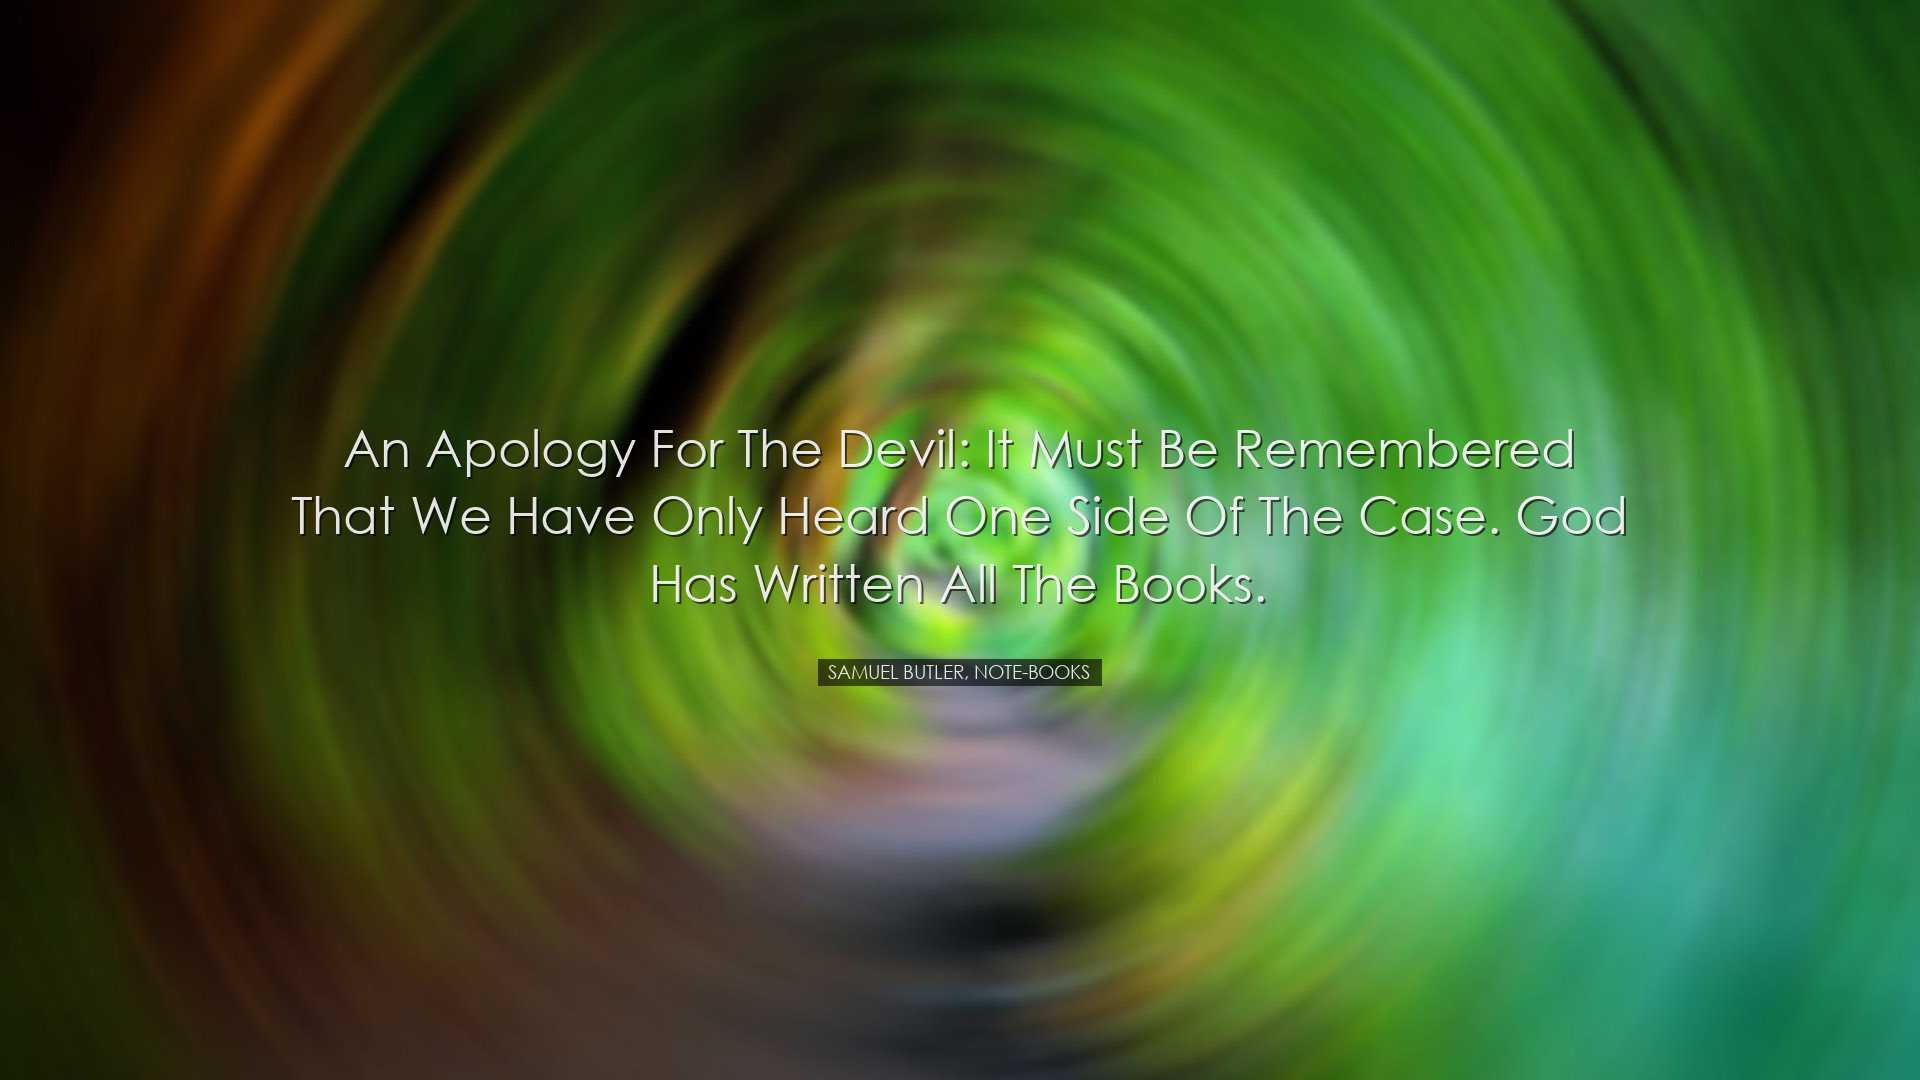 An apology for the Devil: It must be remembered that we have only